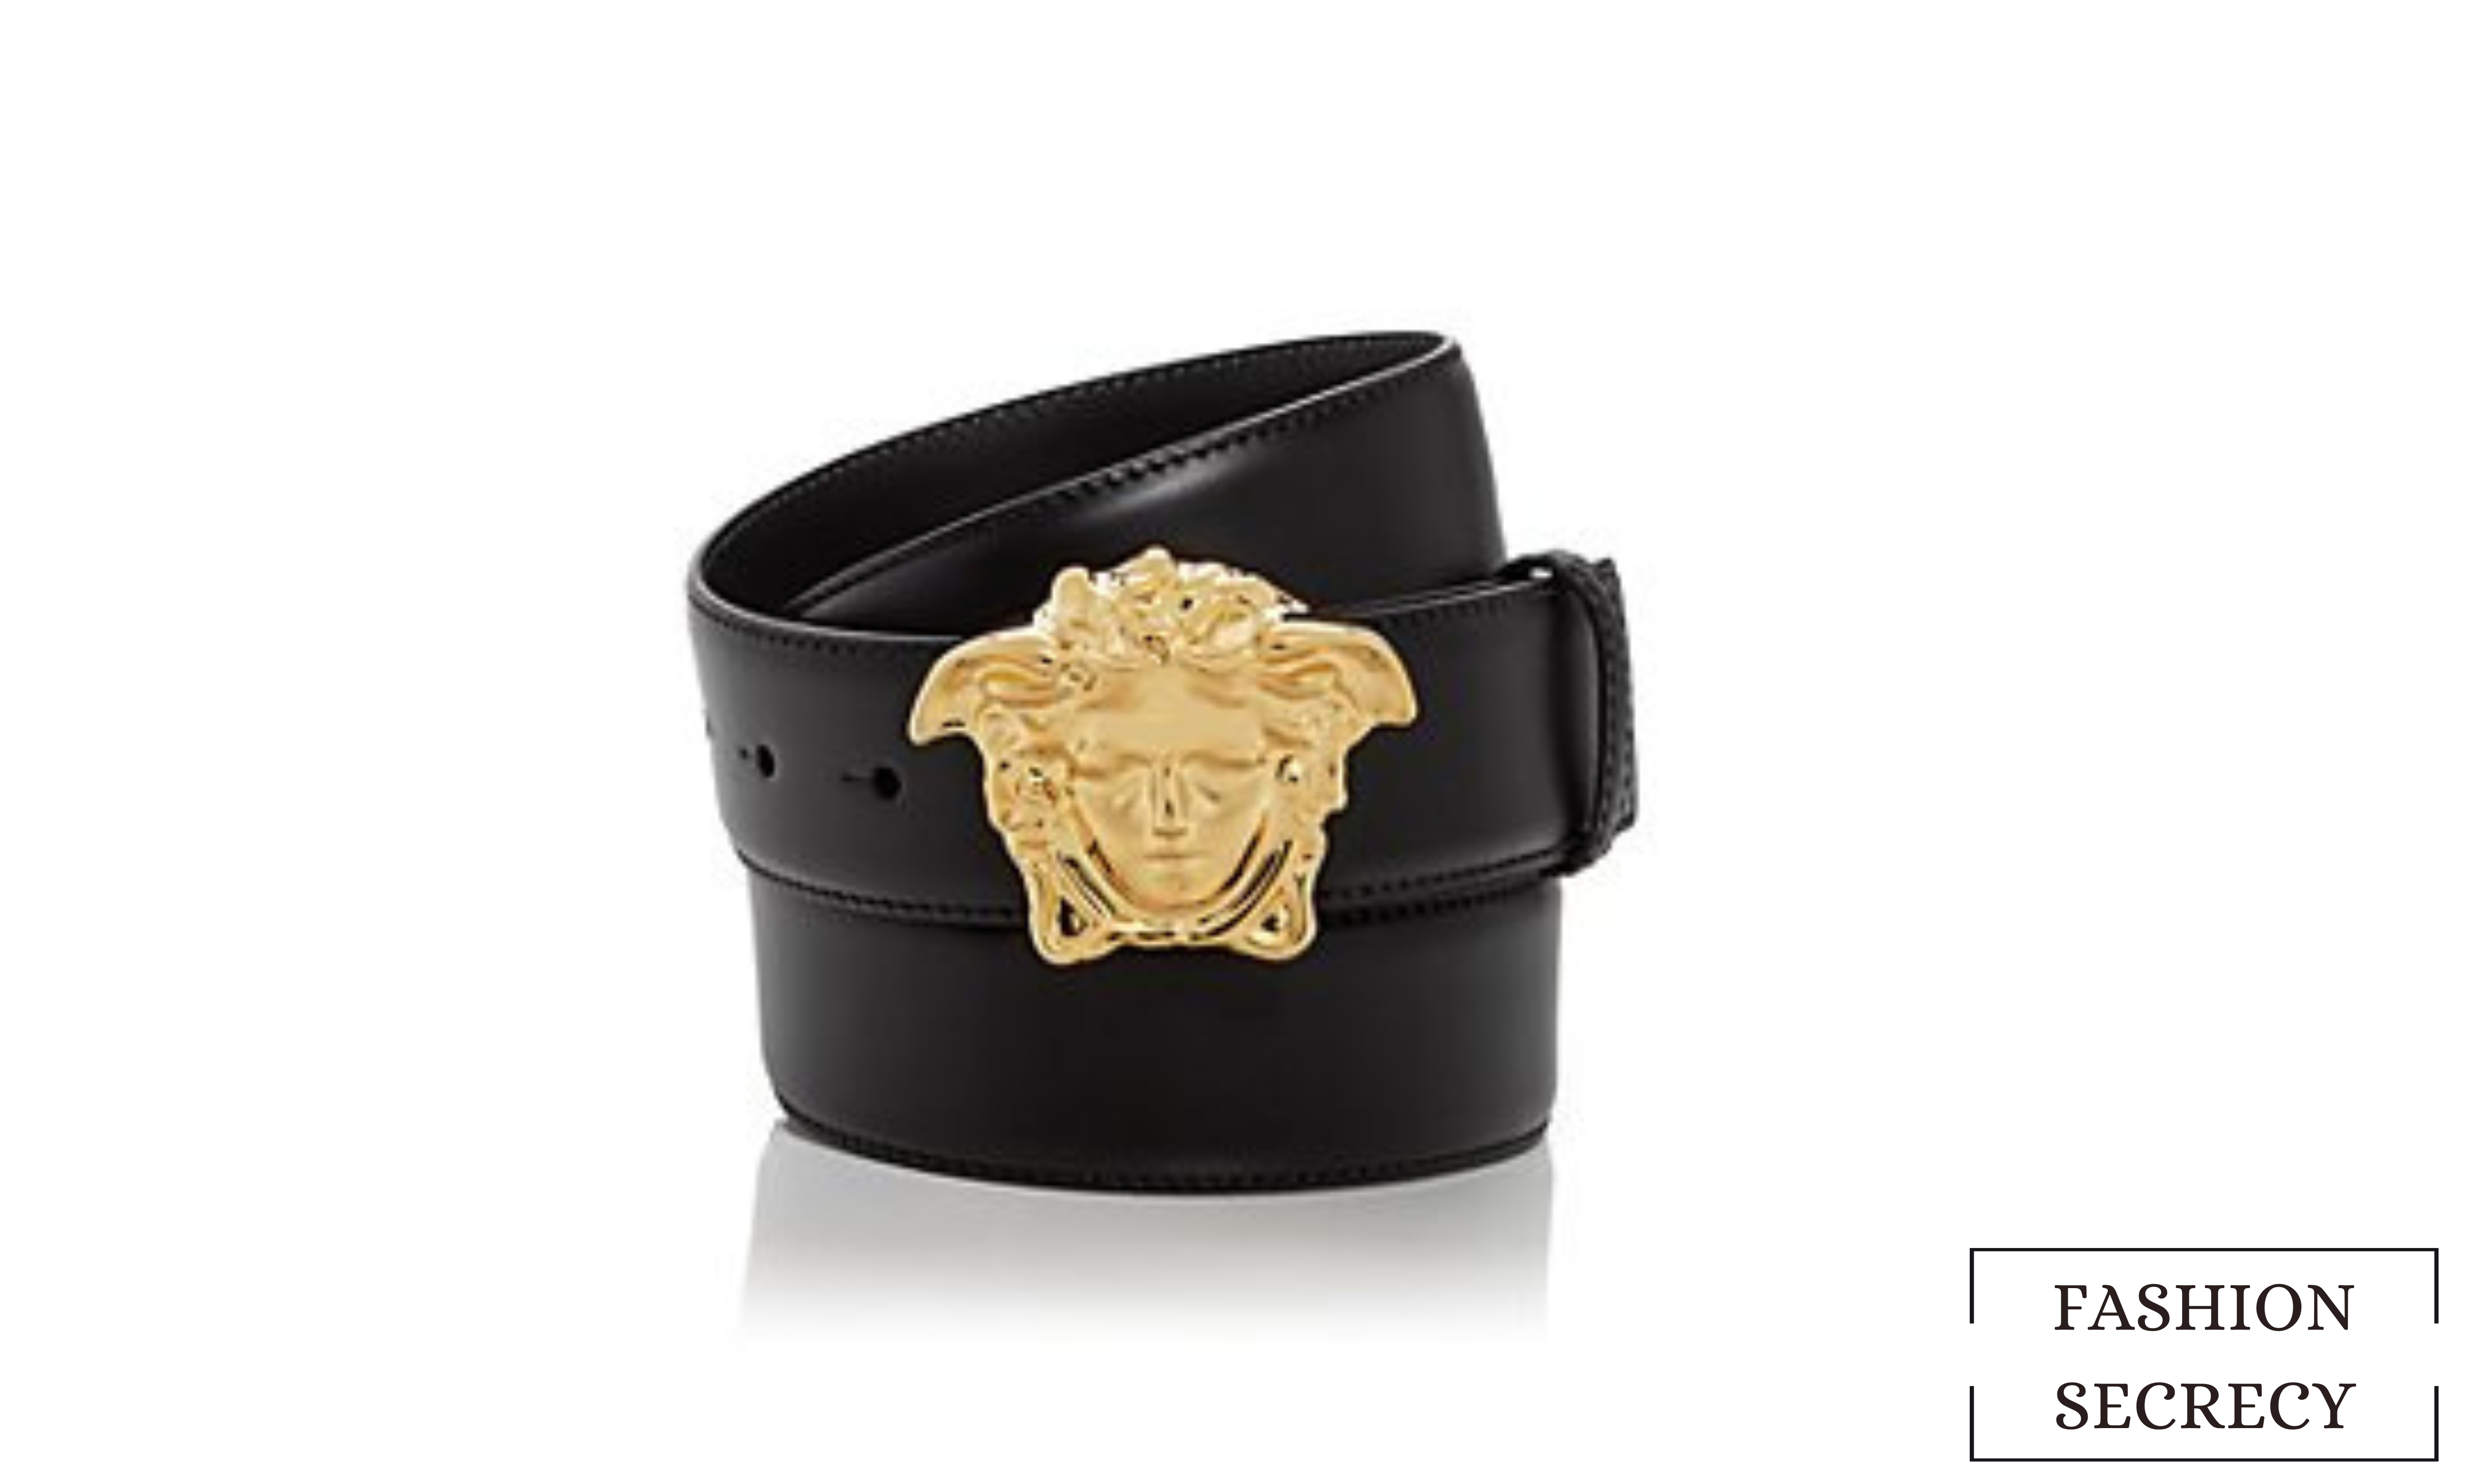 Chanel Belt for Men: Step Up Your Fashion Game